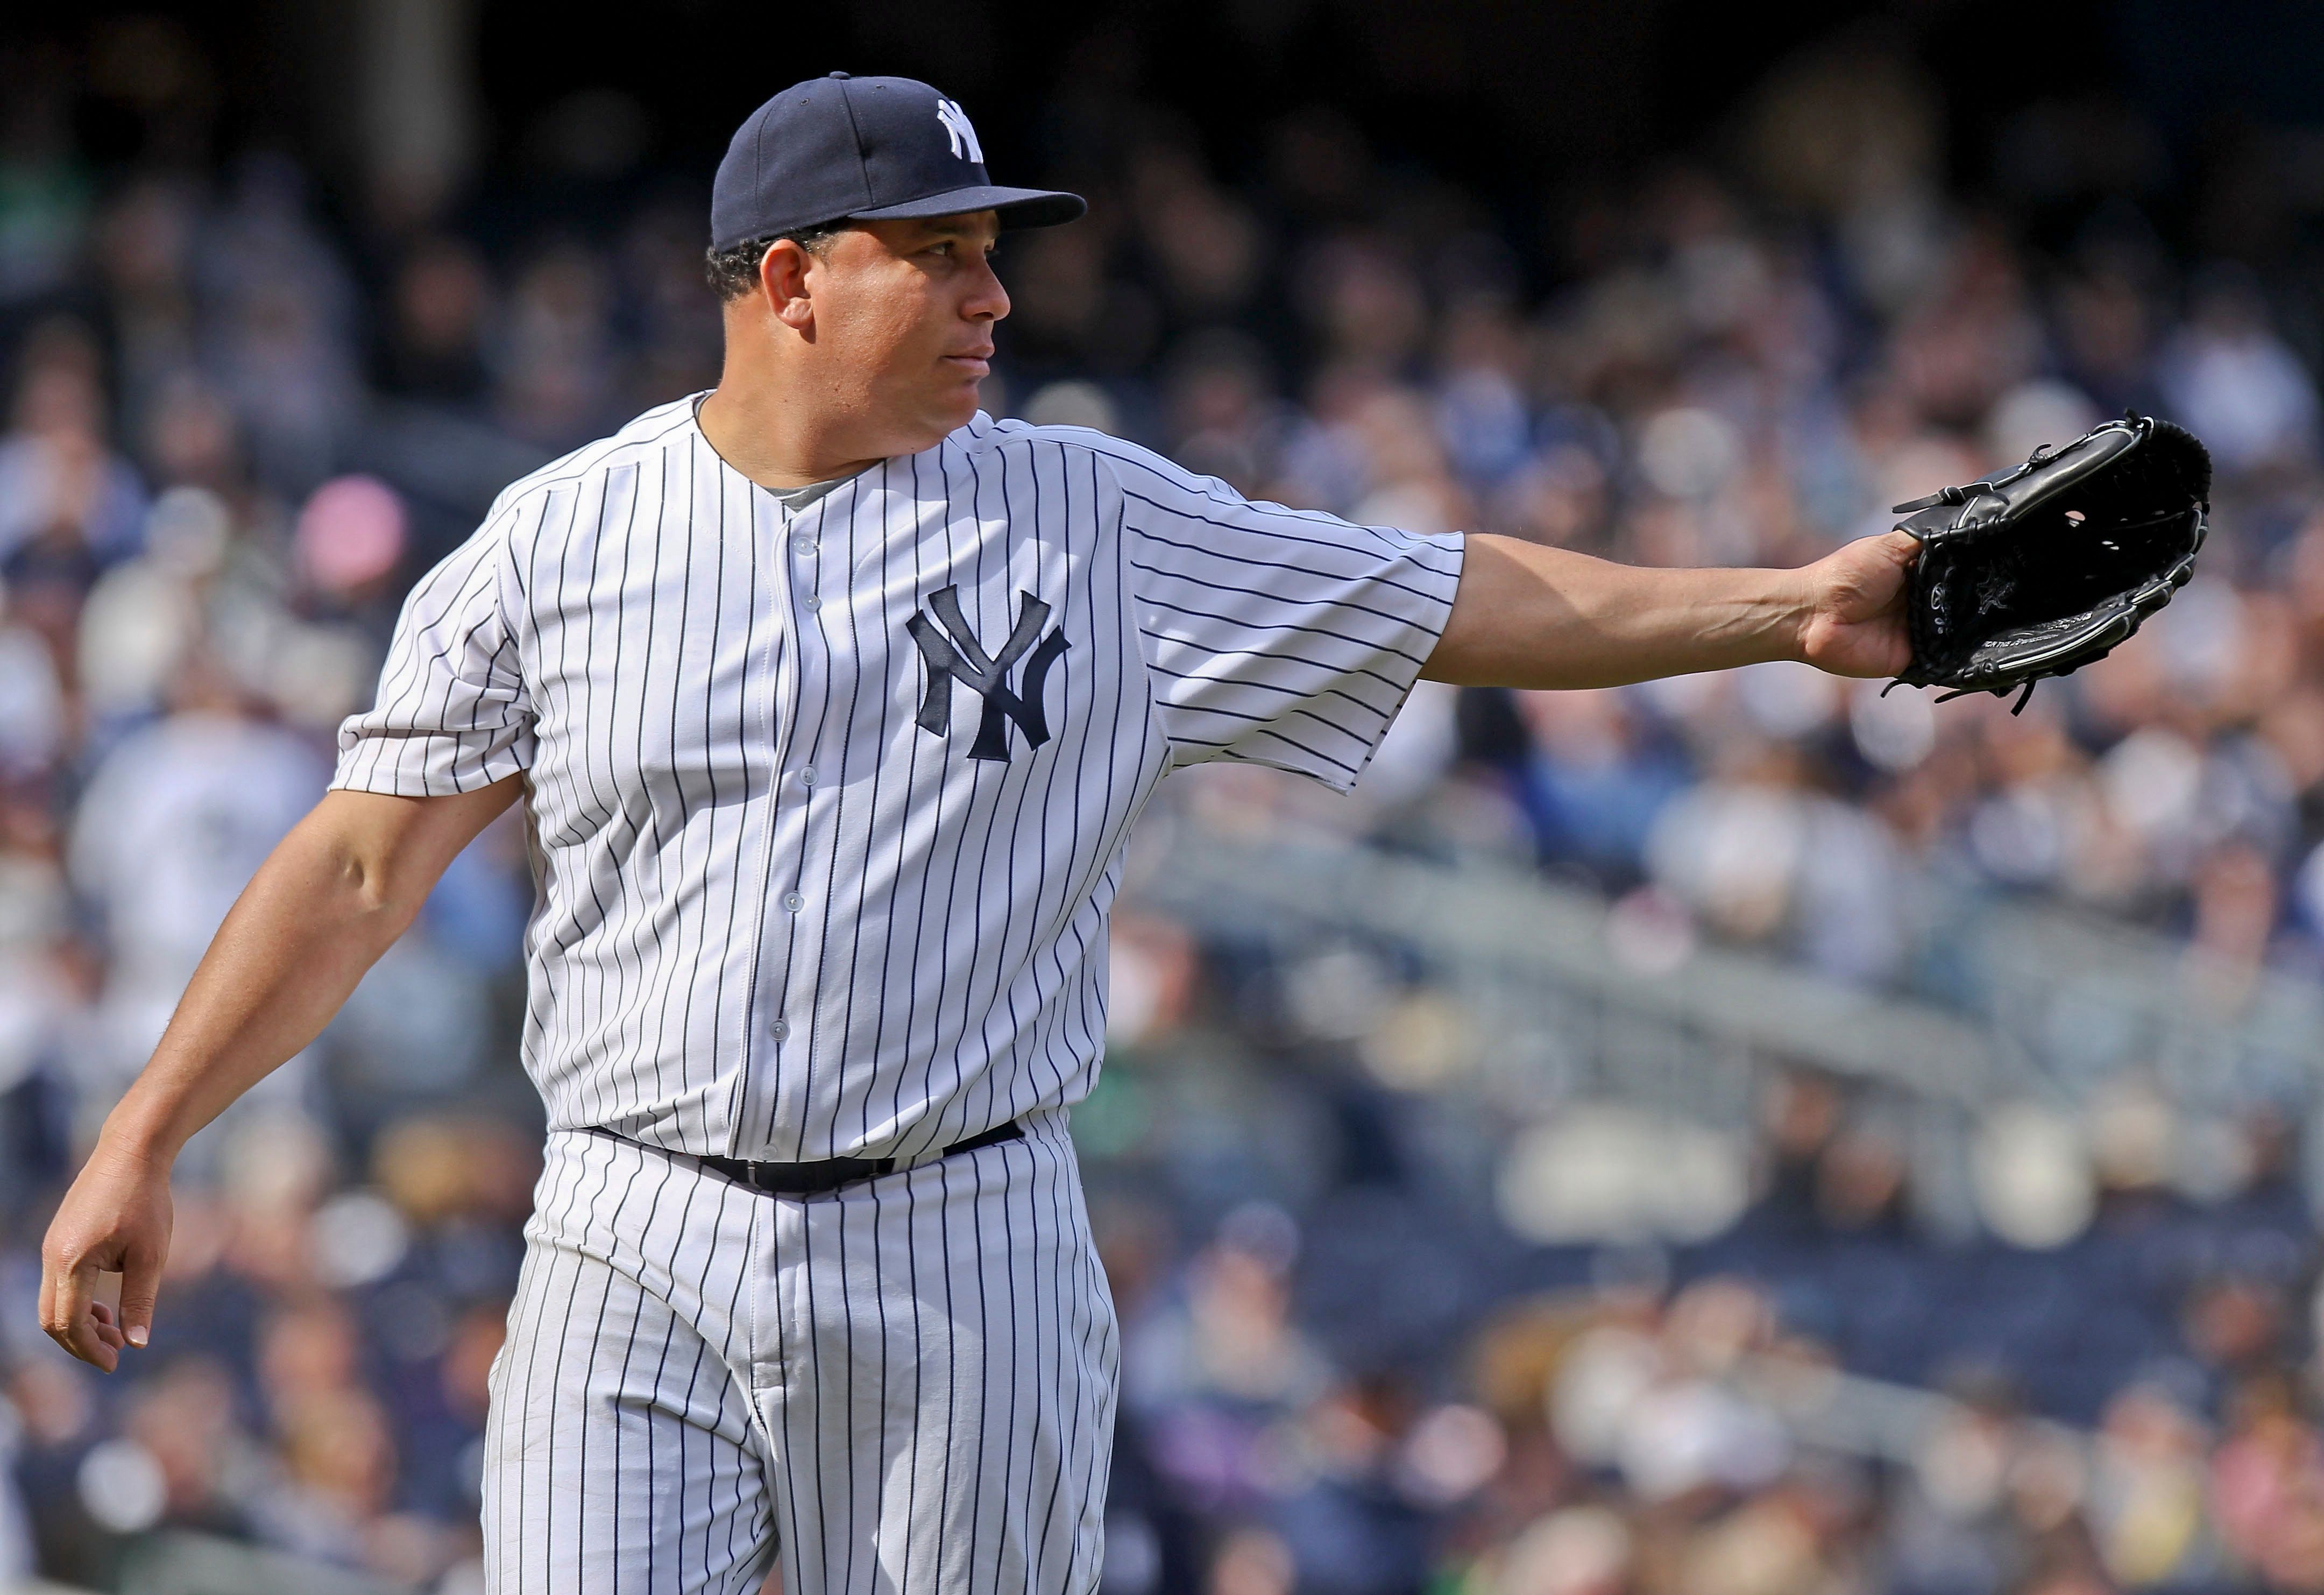 Bartolo Colon looks sharp in second Yankees outing, impresses